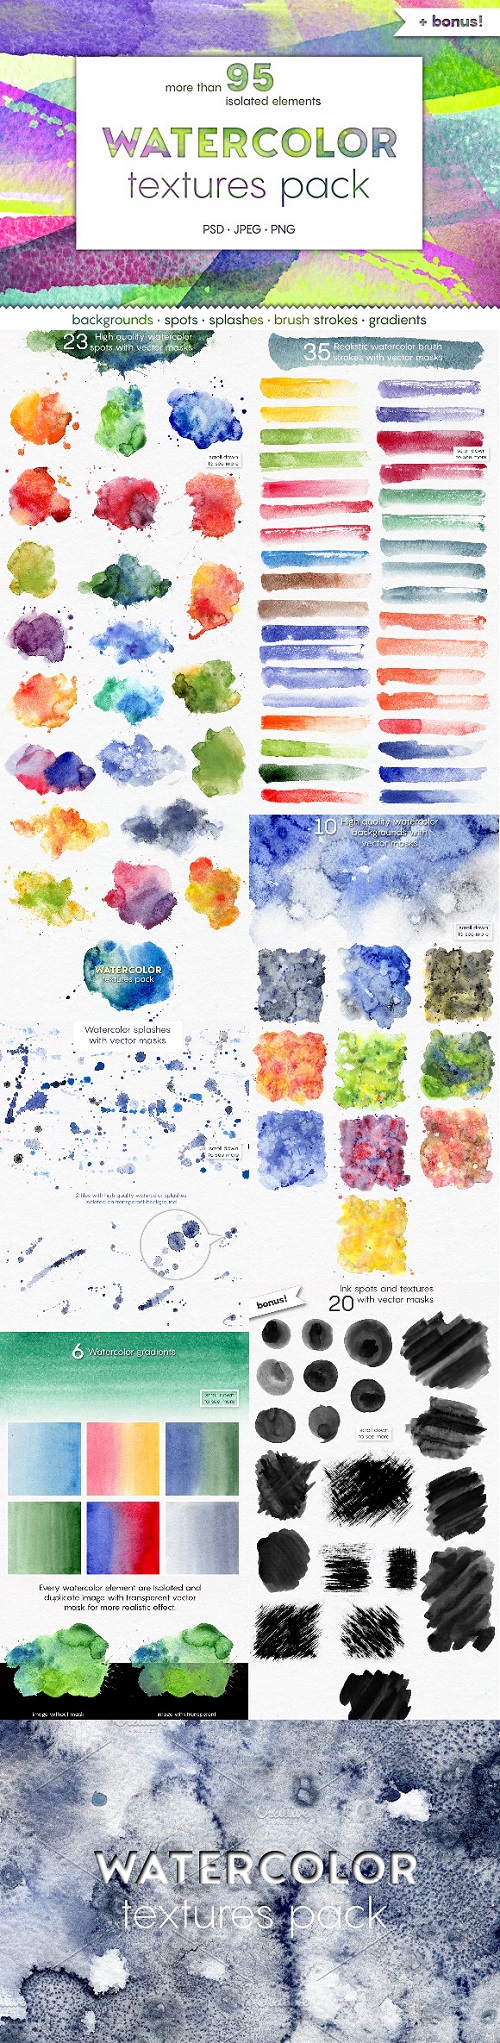 New WATERCOLOR Textures Pack - 1867093